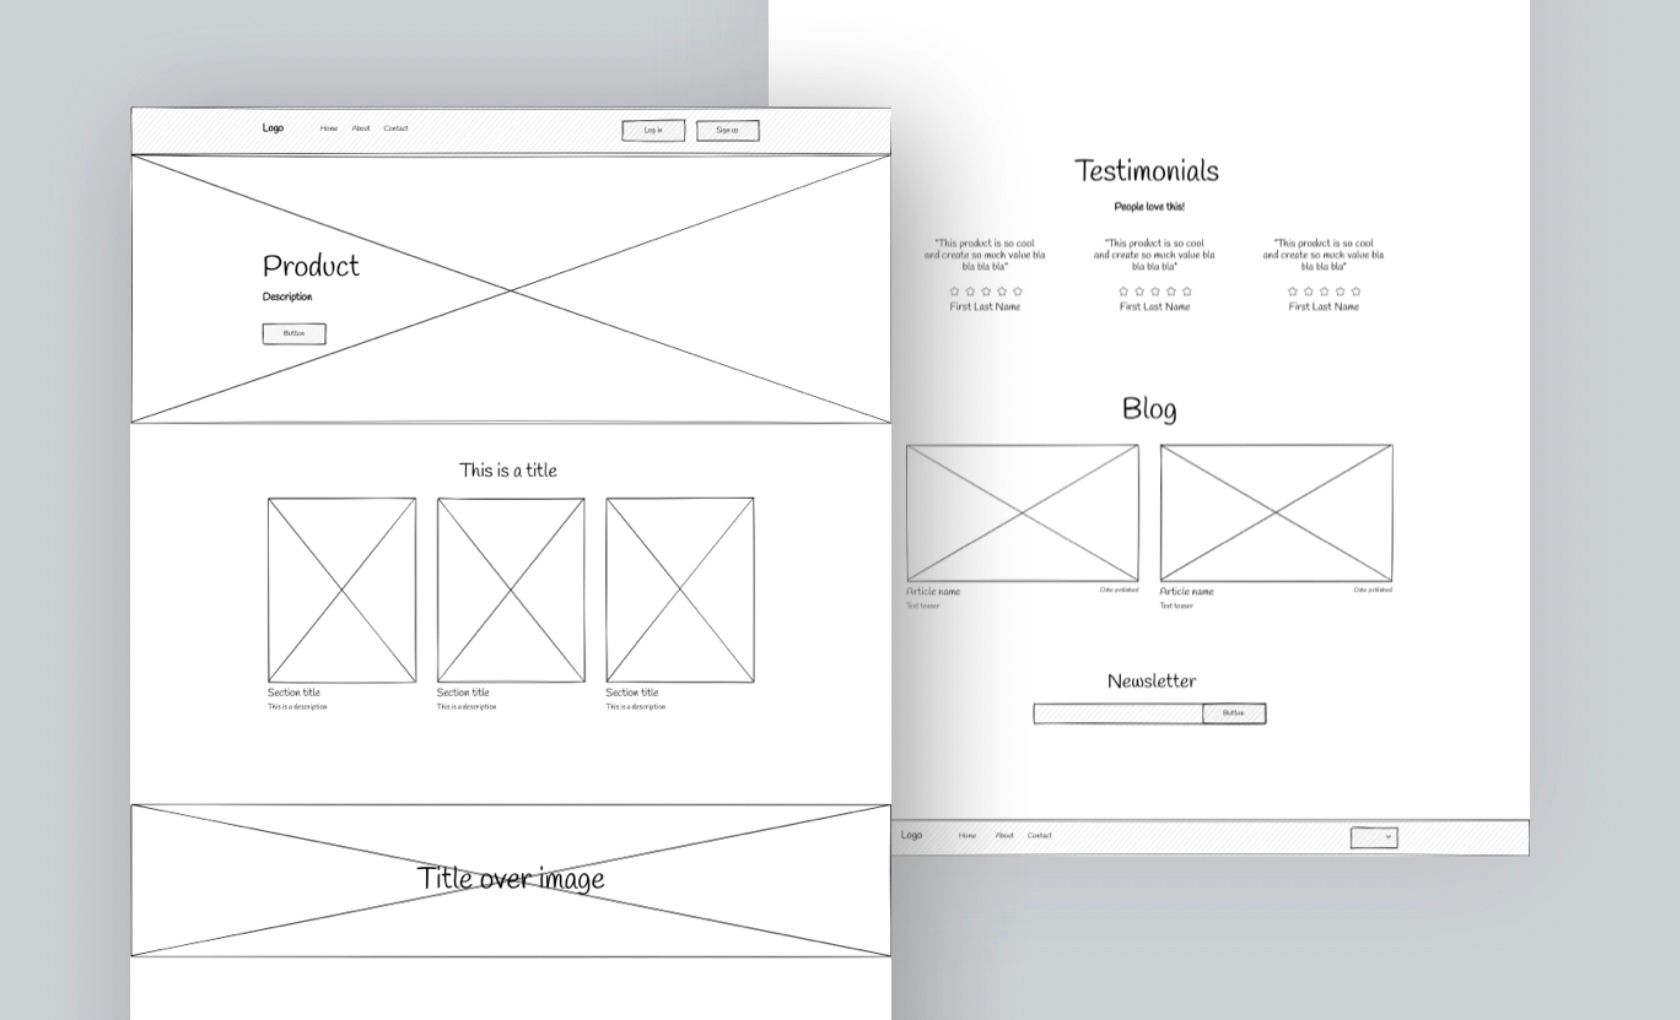 Low-fidelity sketches are often hand drawn, and you shouldn’t sweat your drawing skills. Keep it simple, just like this website wireframe template in Uizard!